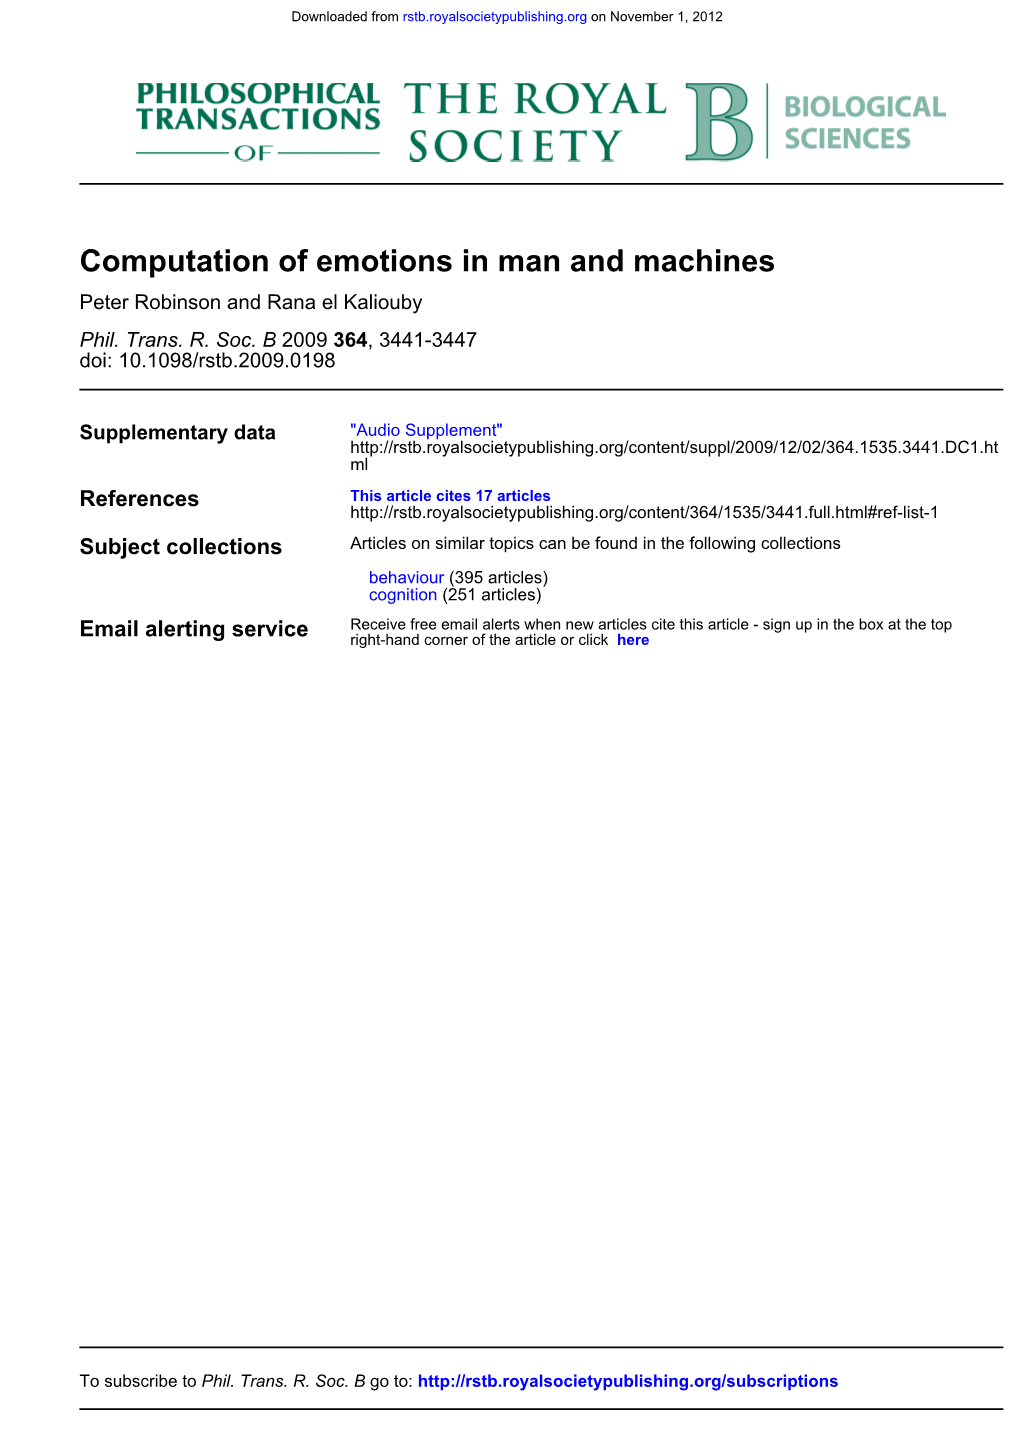 Computation of Emotions in Man and Machines